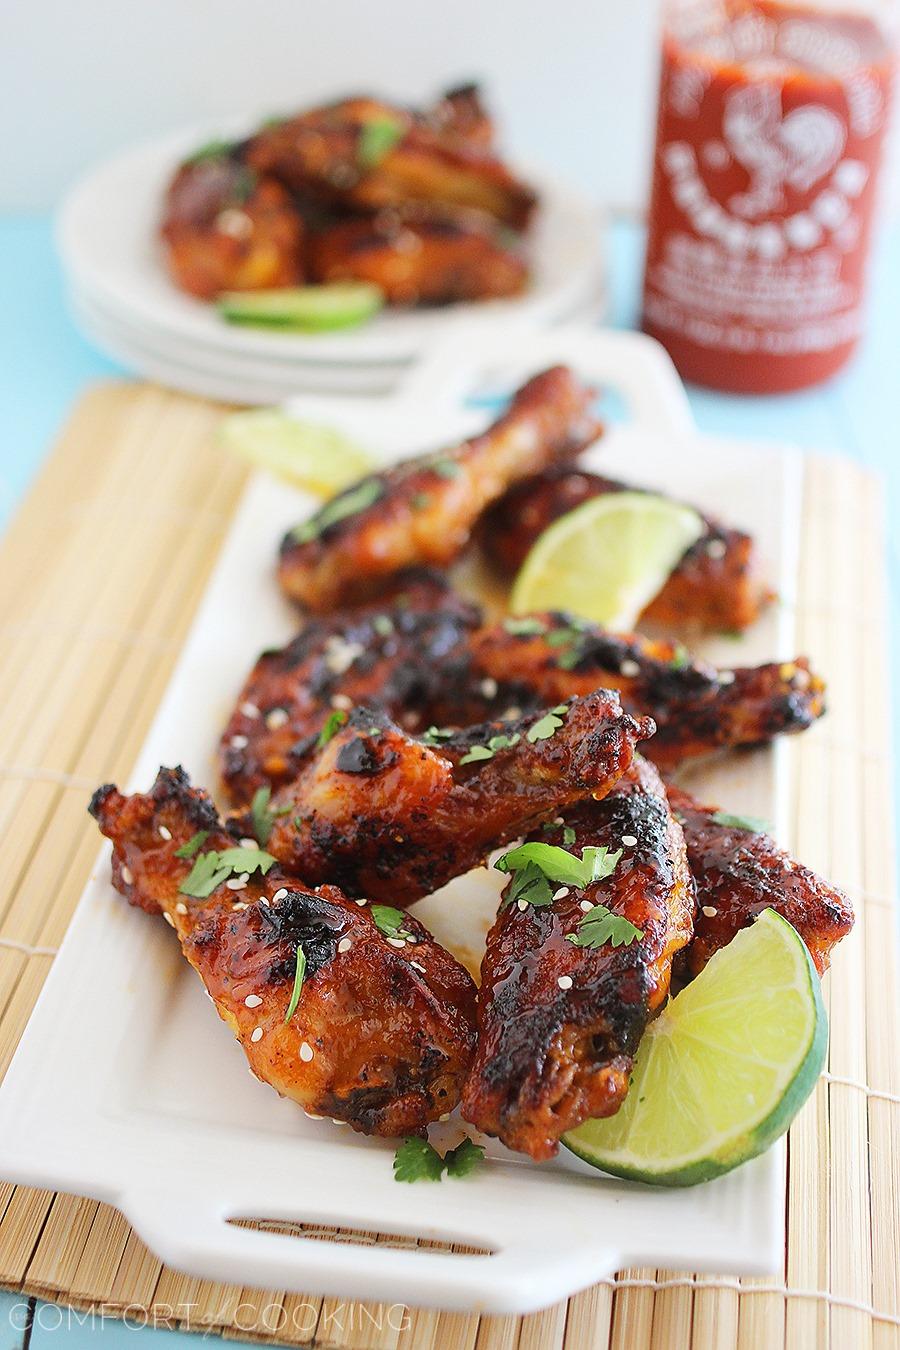 Baked Honey-Sriracha Chicken Wings – Spicy, sweet and sticky baked wings with Sriracha and honey. Perfect for parties! | thecomfortofcooking.com